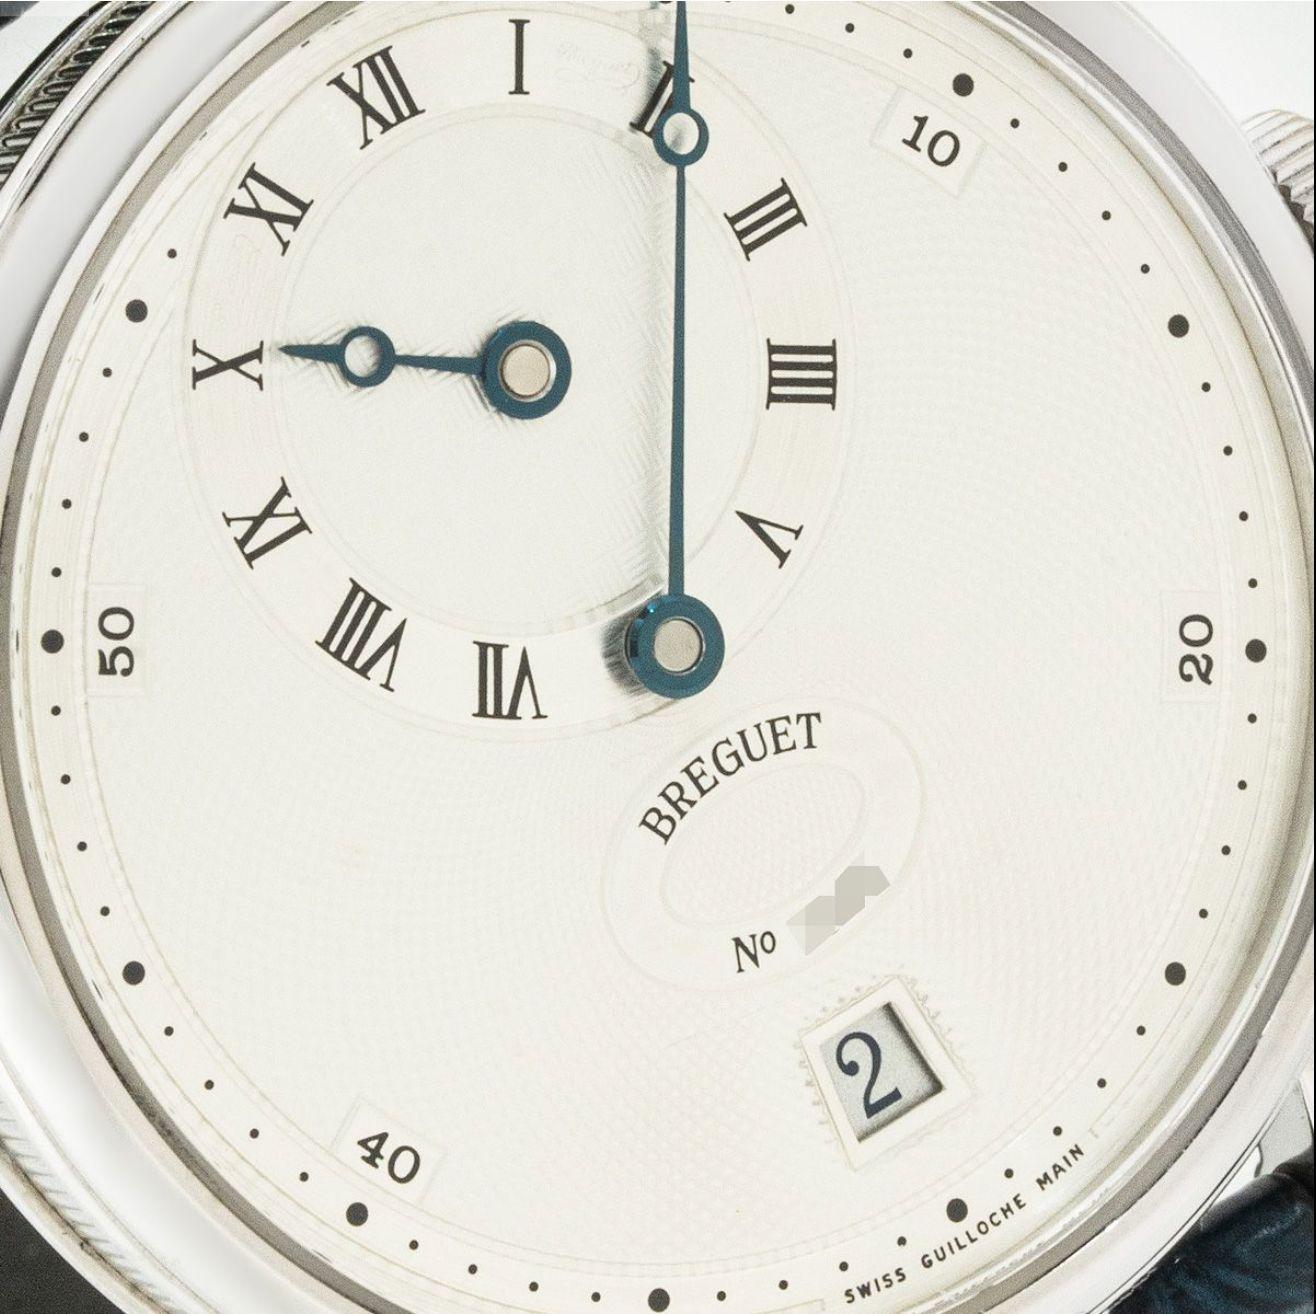 Breguet Classique 5187pt/15/986 Watch In Excellent Condition For Sale In London, GB